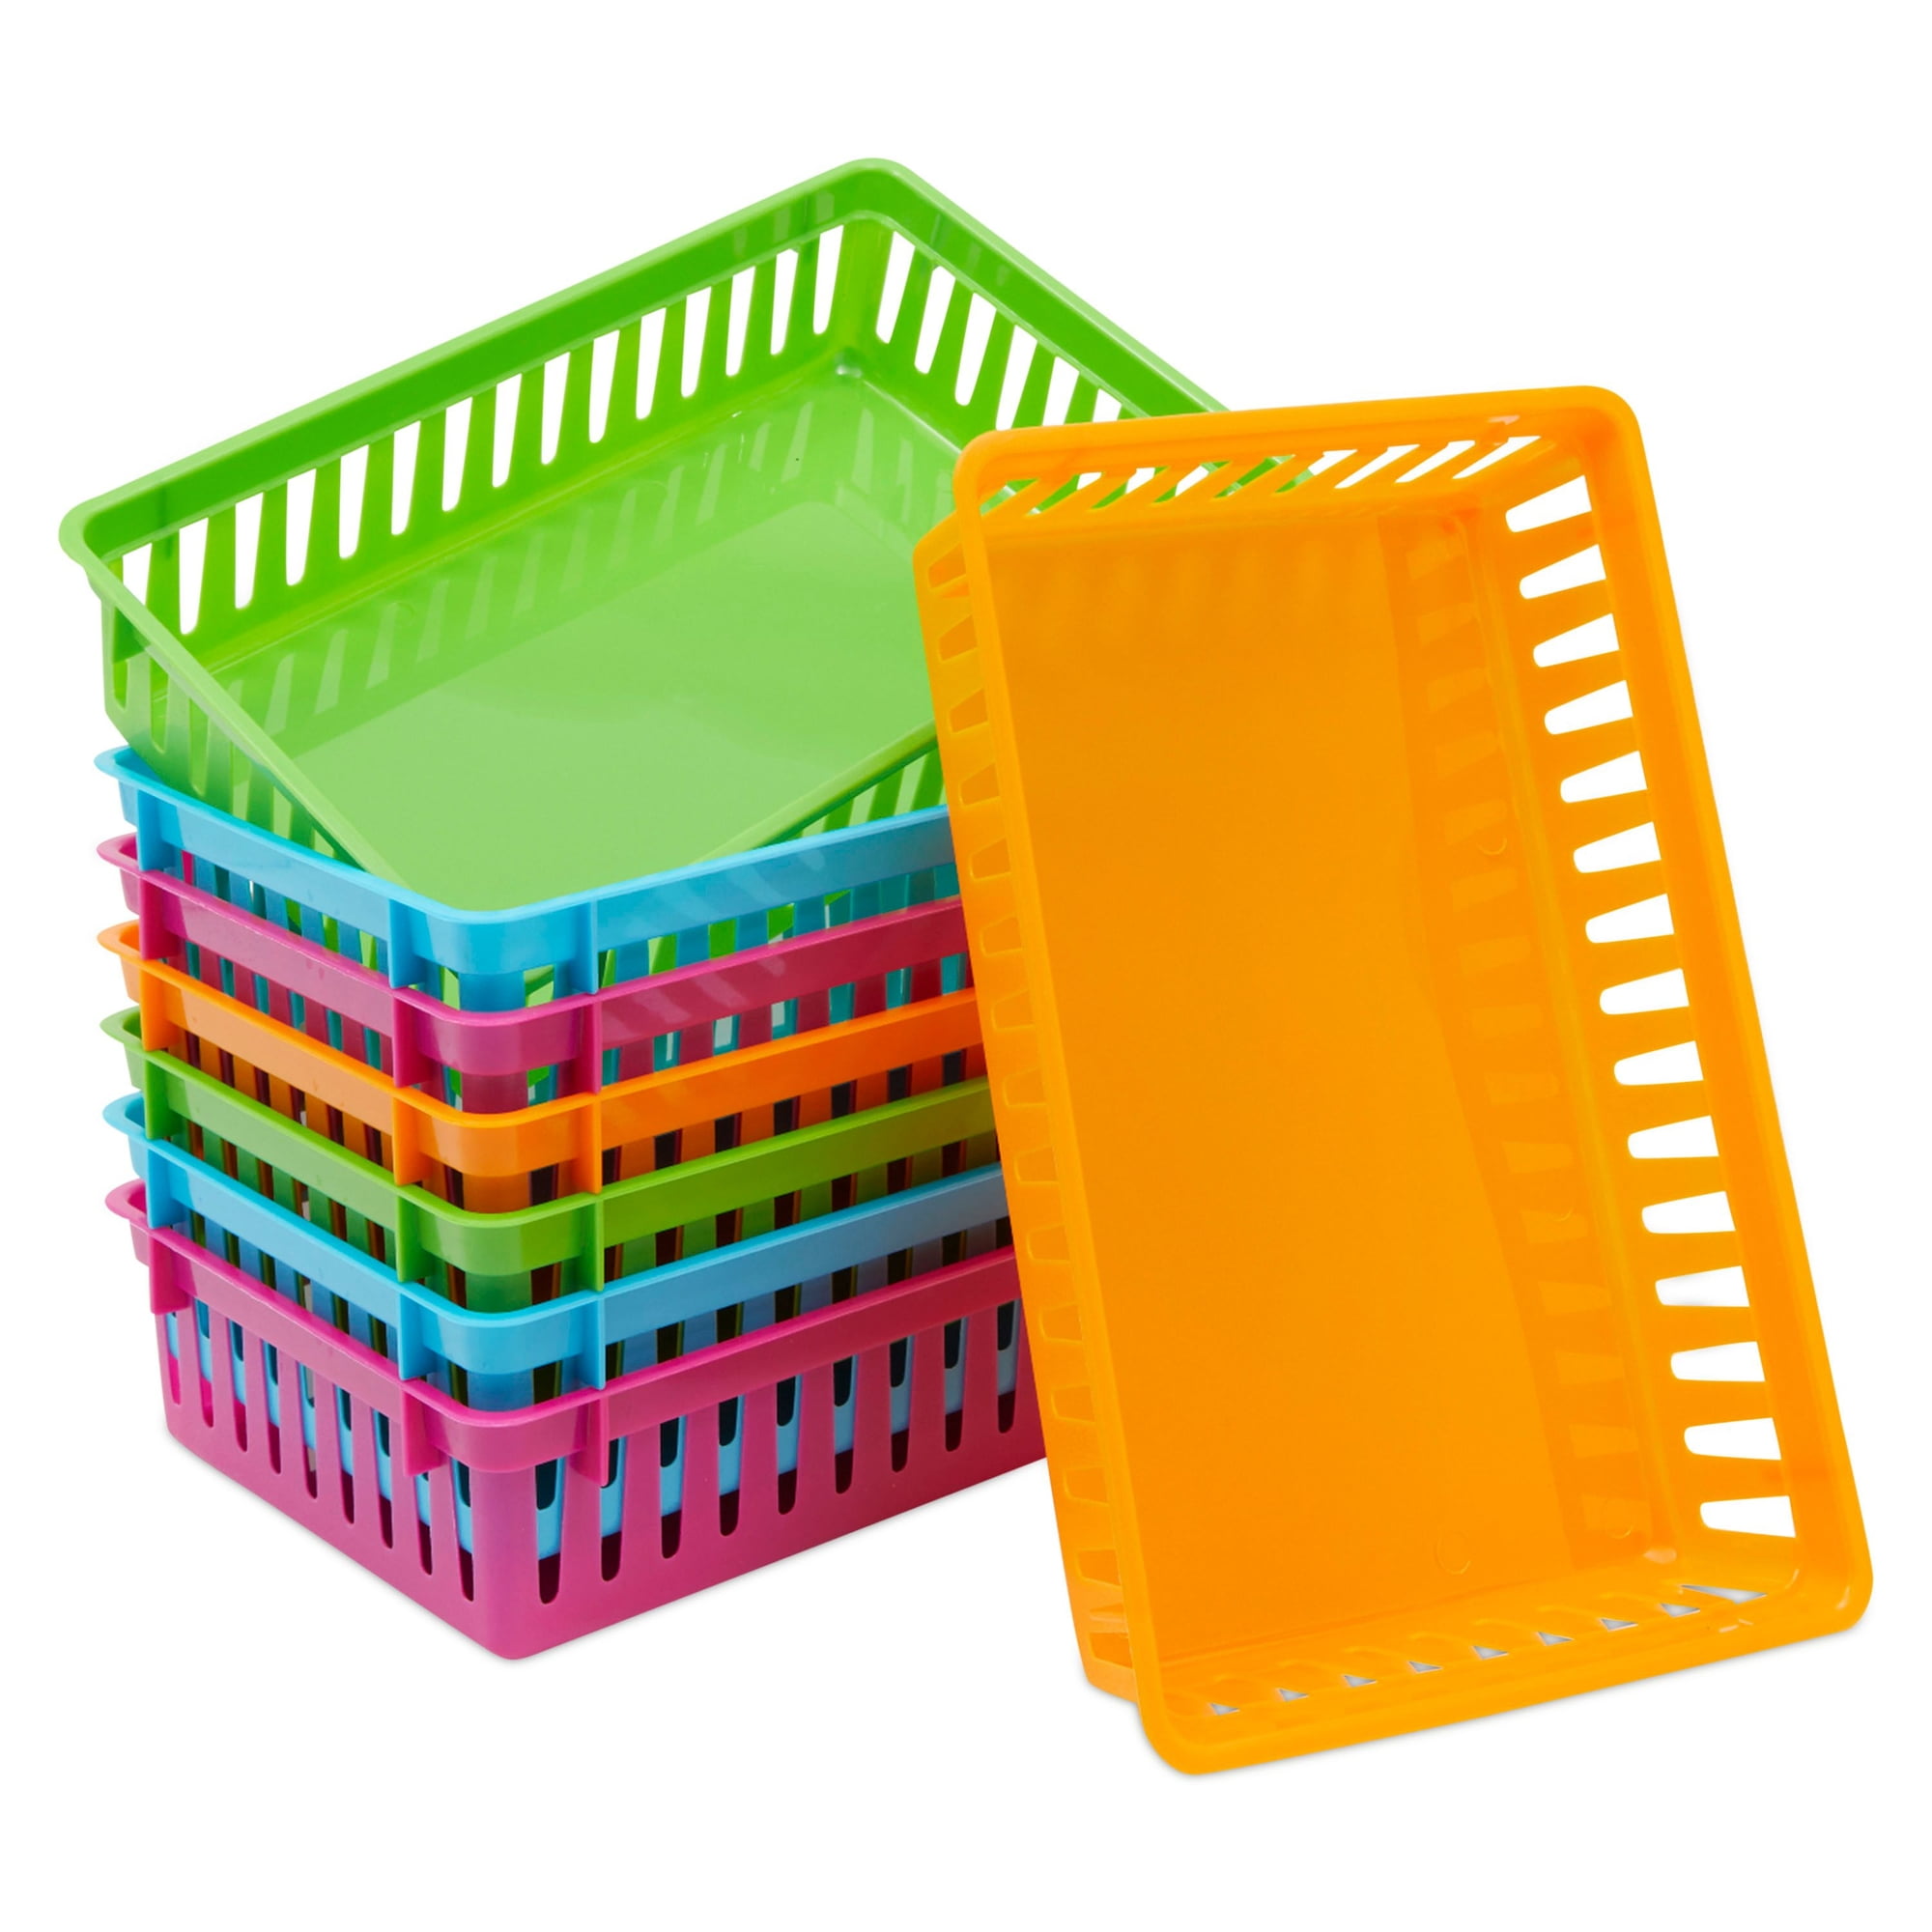 Craftybook Art Supply Storage Organizer Set - Colorful Assorted Set of 6 Bin Baskets Stackable Plastic Classroom and Utility Caddy Organizer with